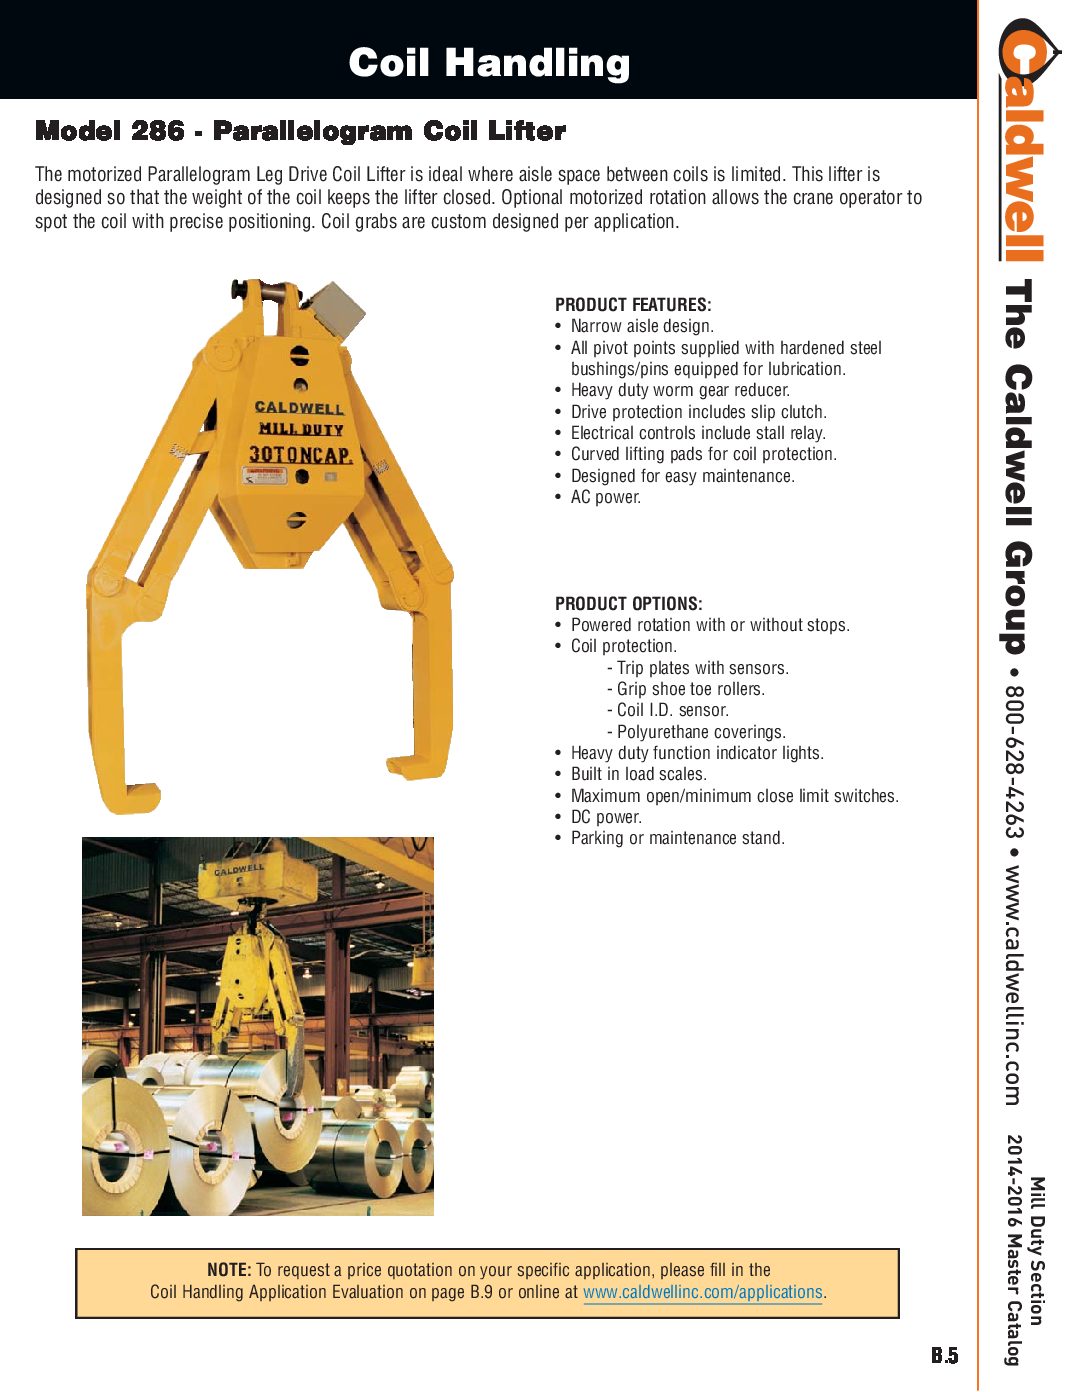 Caldwell MILL DUTY Parallelogram Coil Lifter Spread Sheet pdf